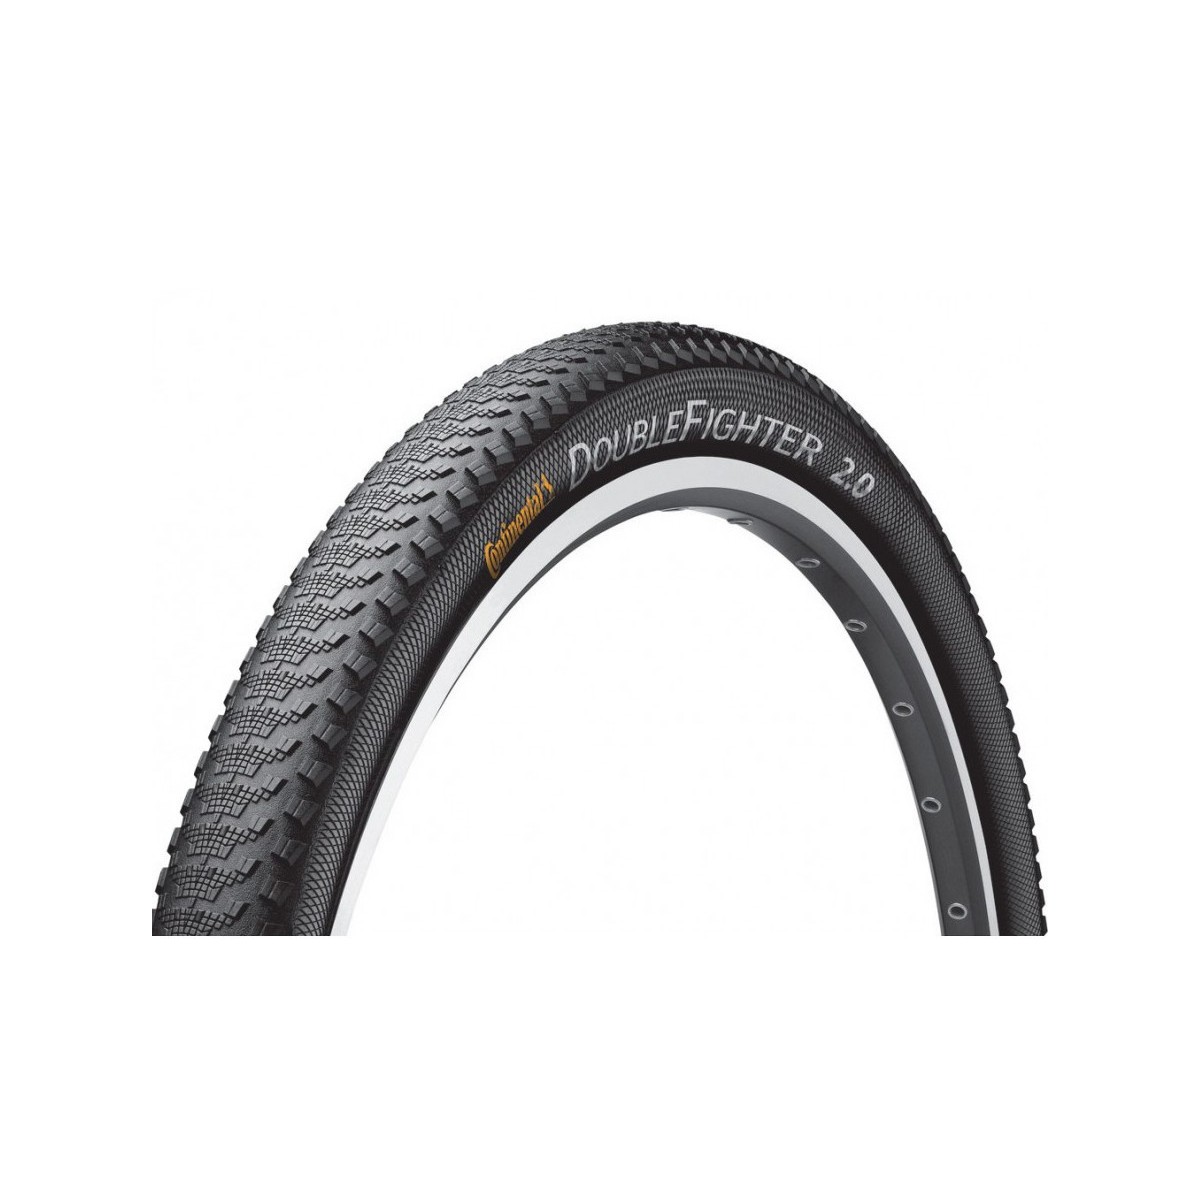 CONTINENTAL tyre DOUBLE FIGHTER III 24 x 2.00